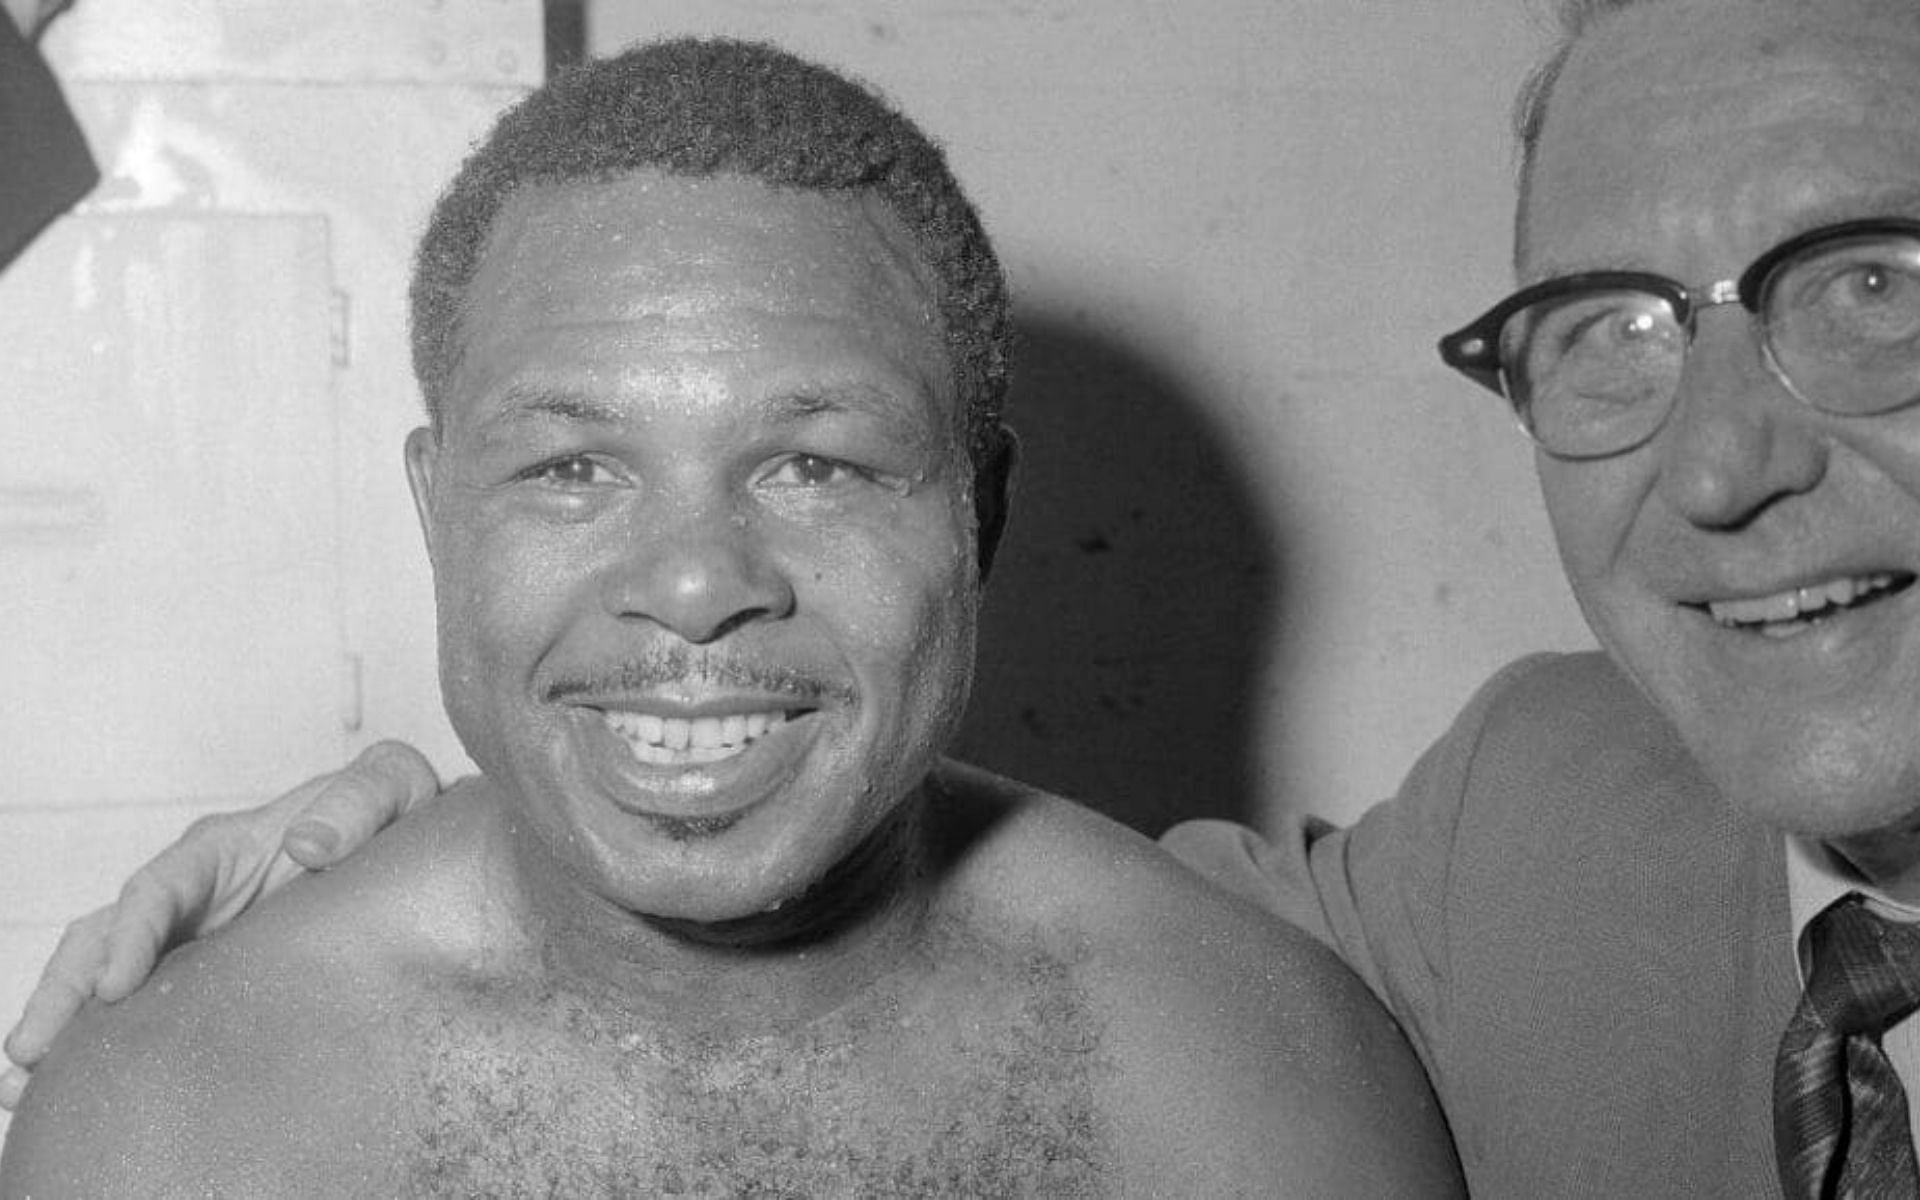 Archie Moore (left) had the second-most knockouts in boxing history with 132. [Image credit: sports.betmgm.com]